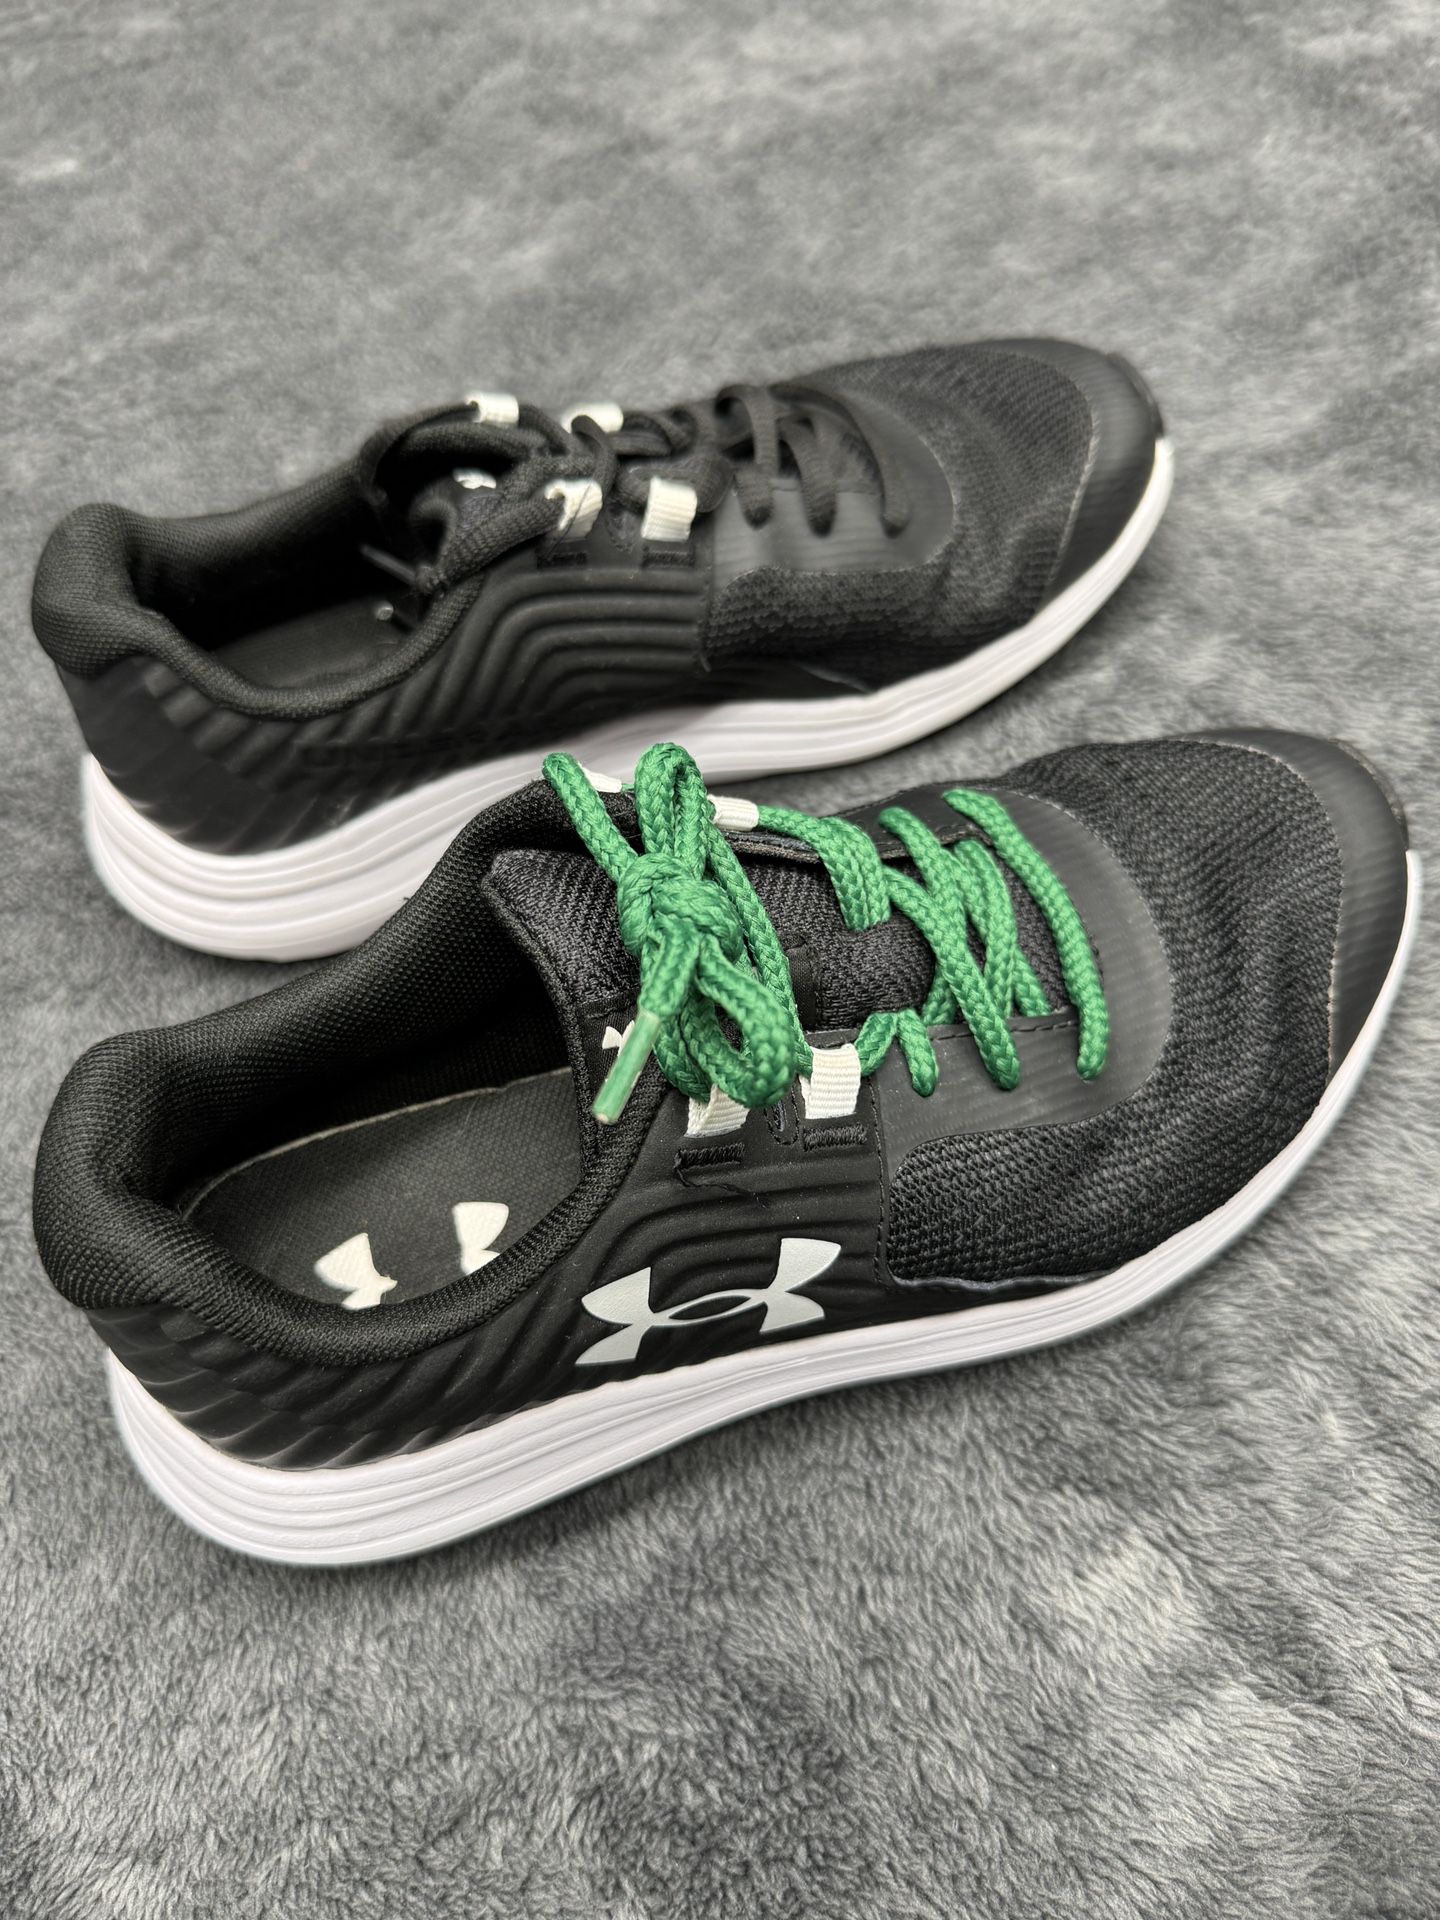 Under Armour Girl’s 3.5 Athletic Shoes in good shape!  